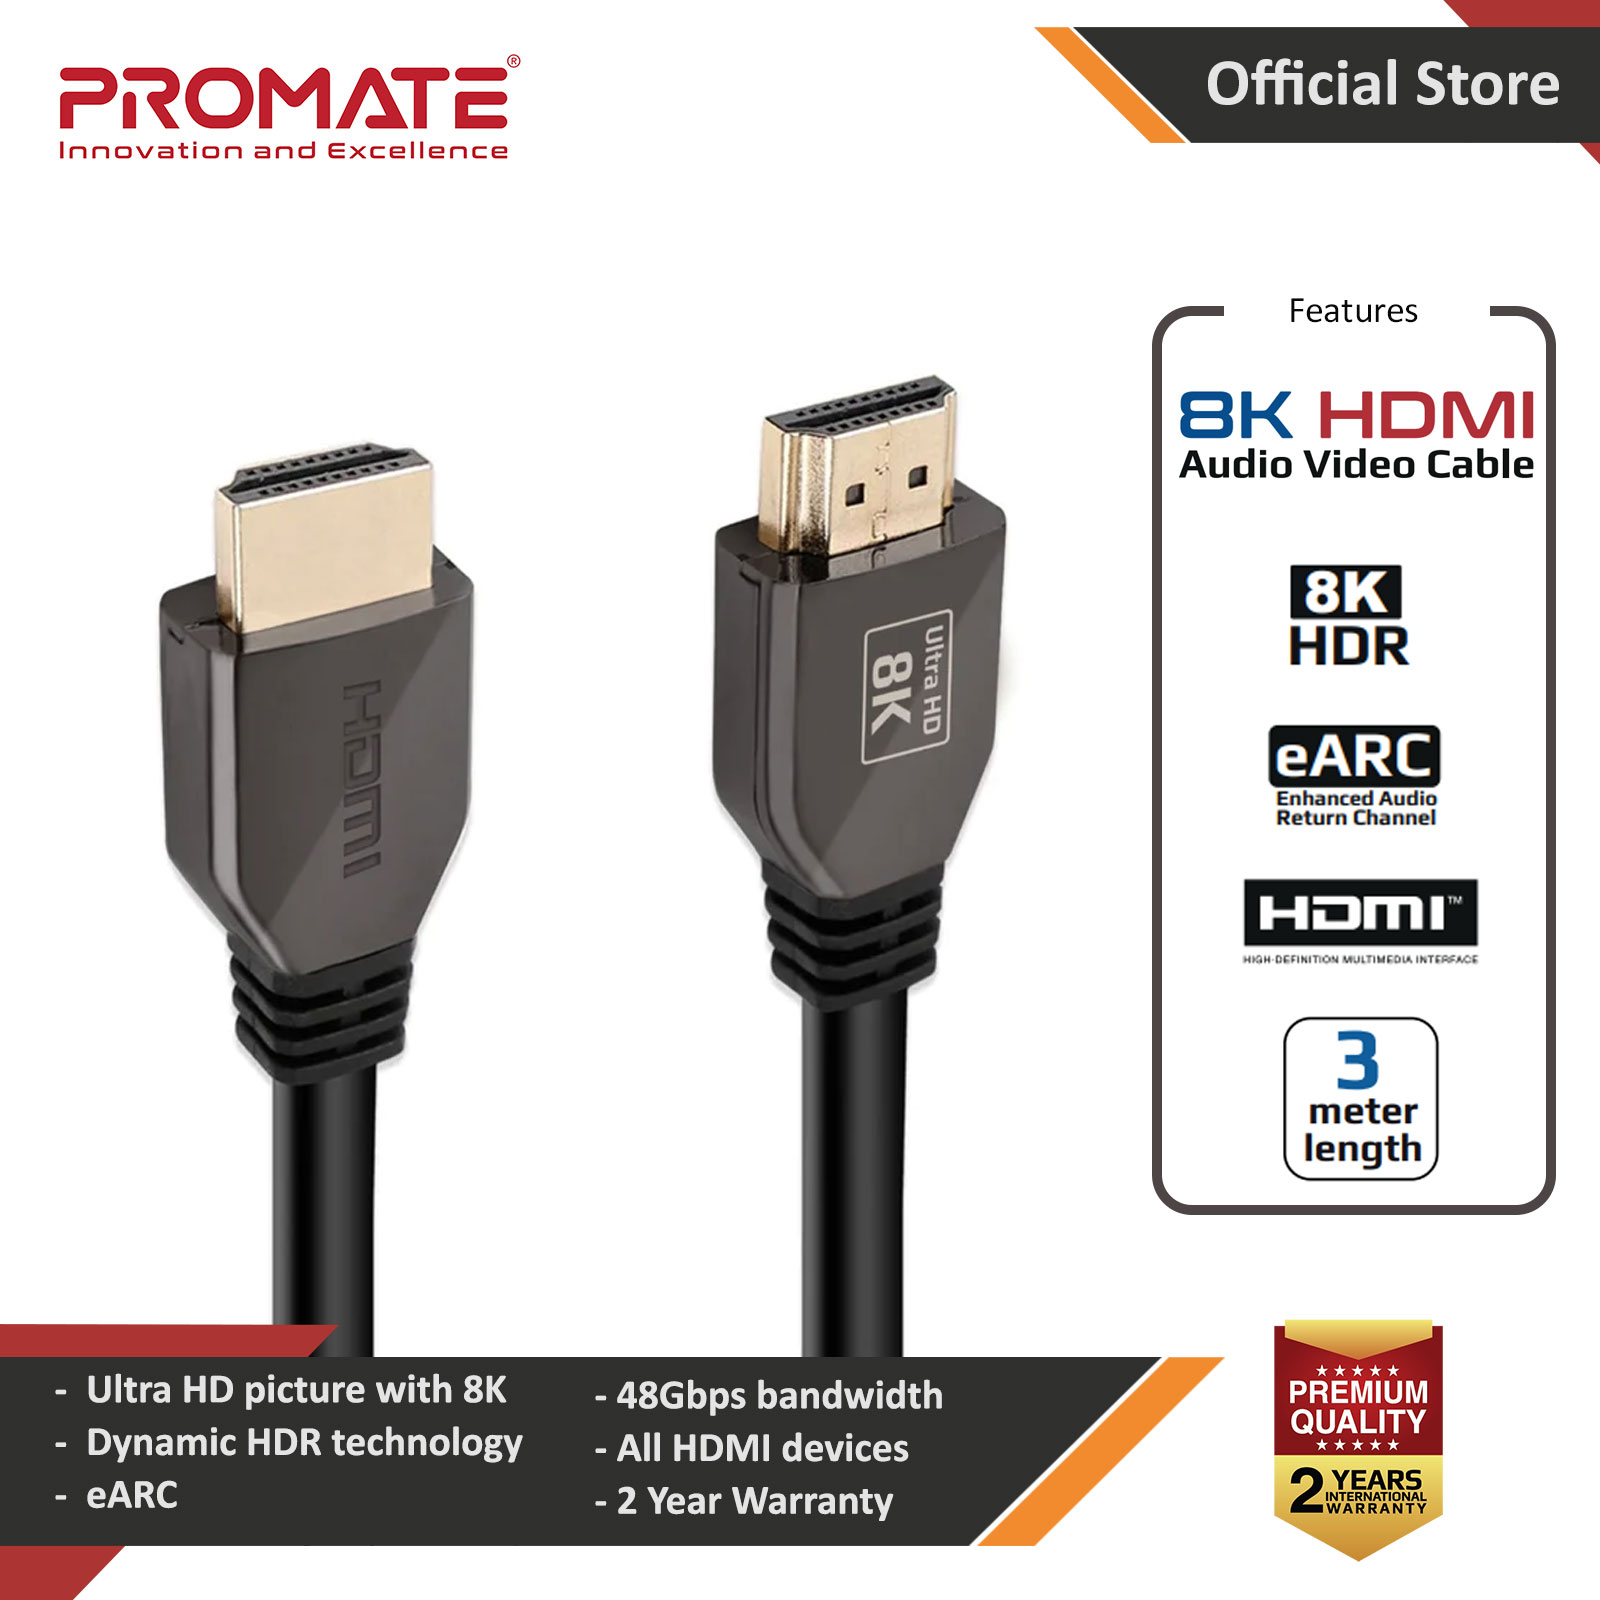 Picture of PROMATE ProLink8K-300 Ultra HD High Speed 8K HDMI 2.1 Audio Video Cable HDR Colour Support eARC Connectivity Dolby Vision 3 meter 300cm Cable Length